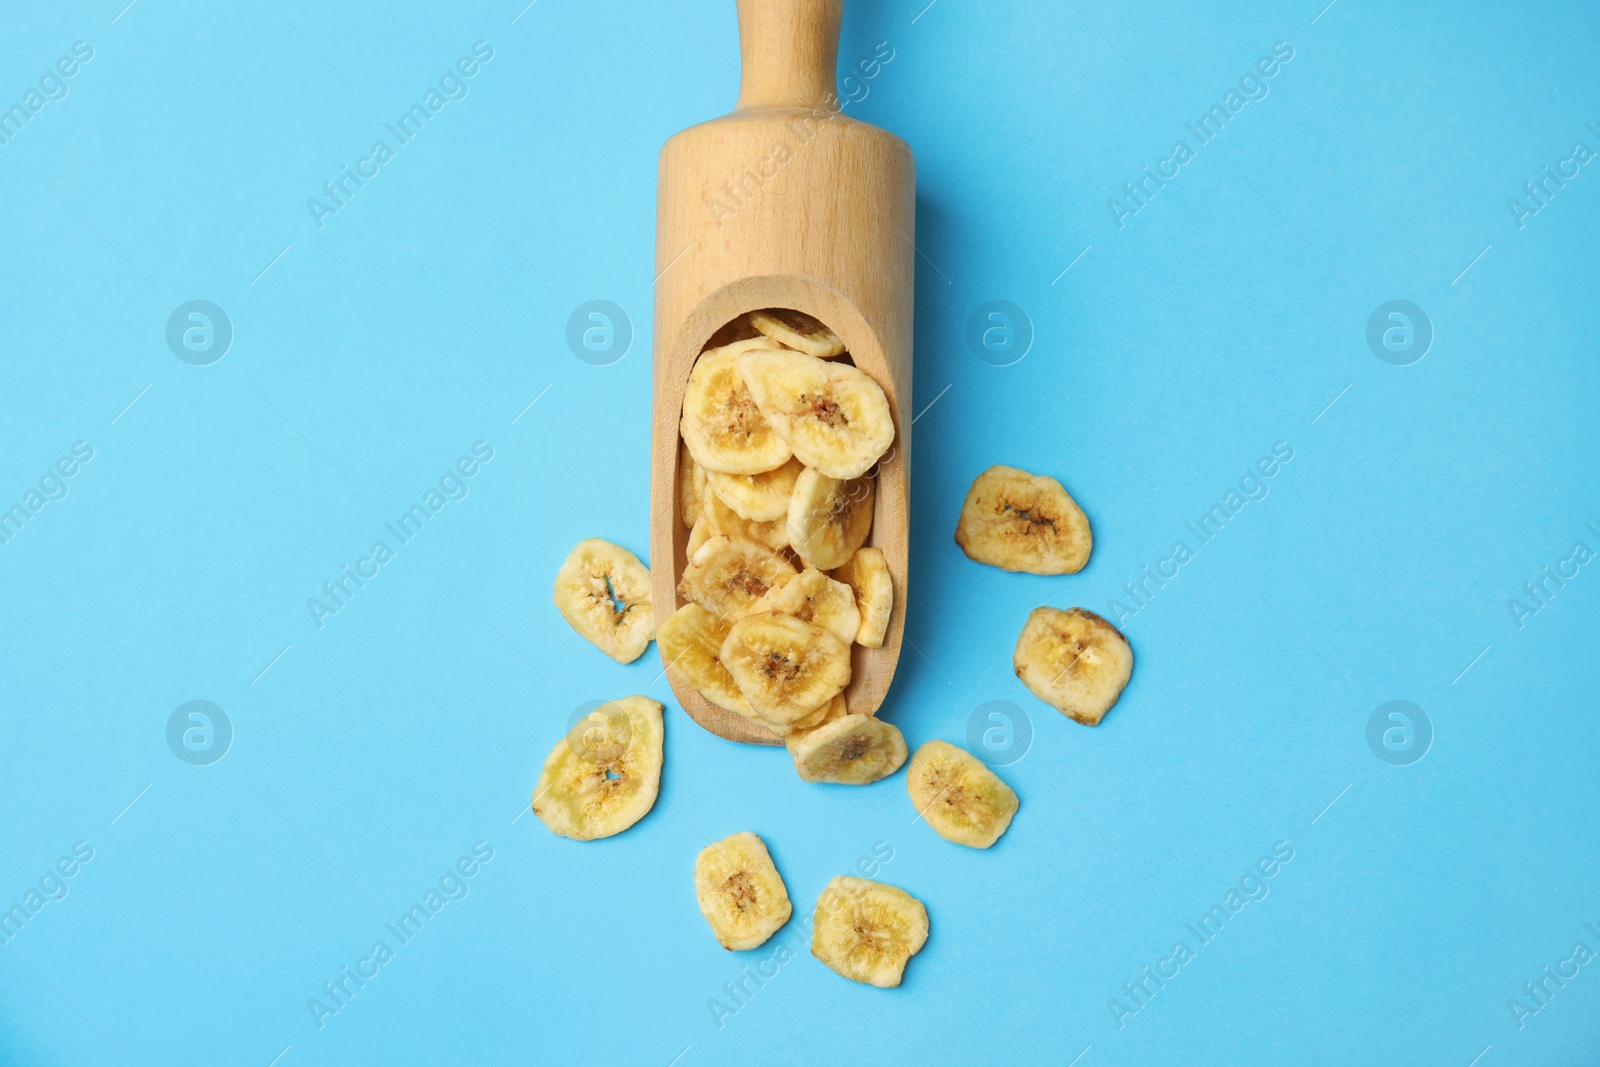 Photo of Wooden scoop with banana slices on color background, top view. Dried fruit as healthy snack